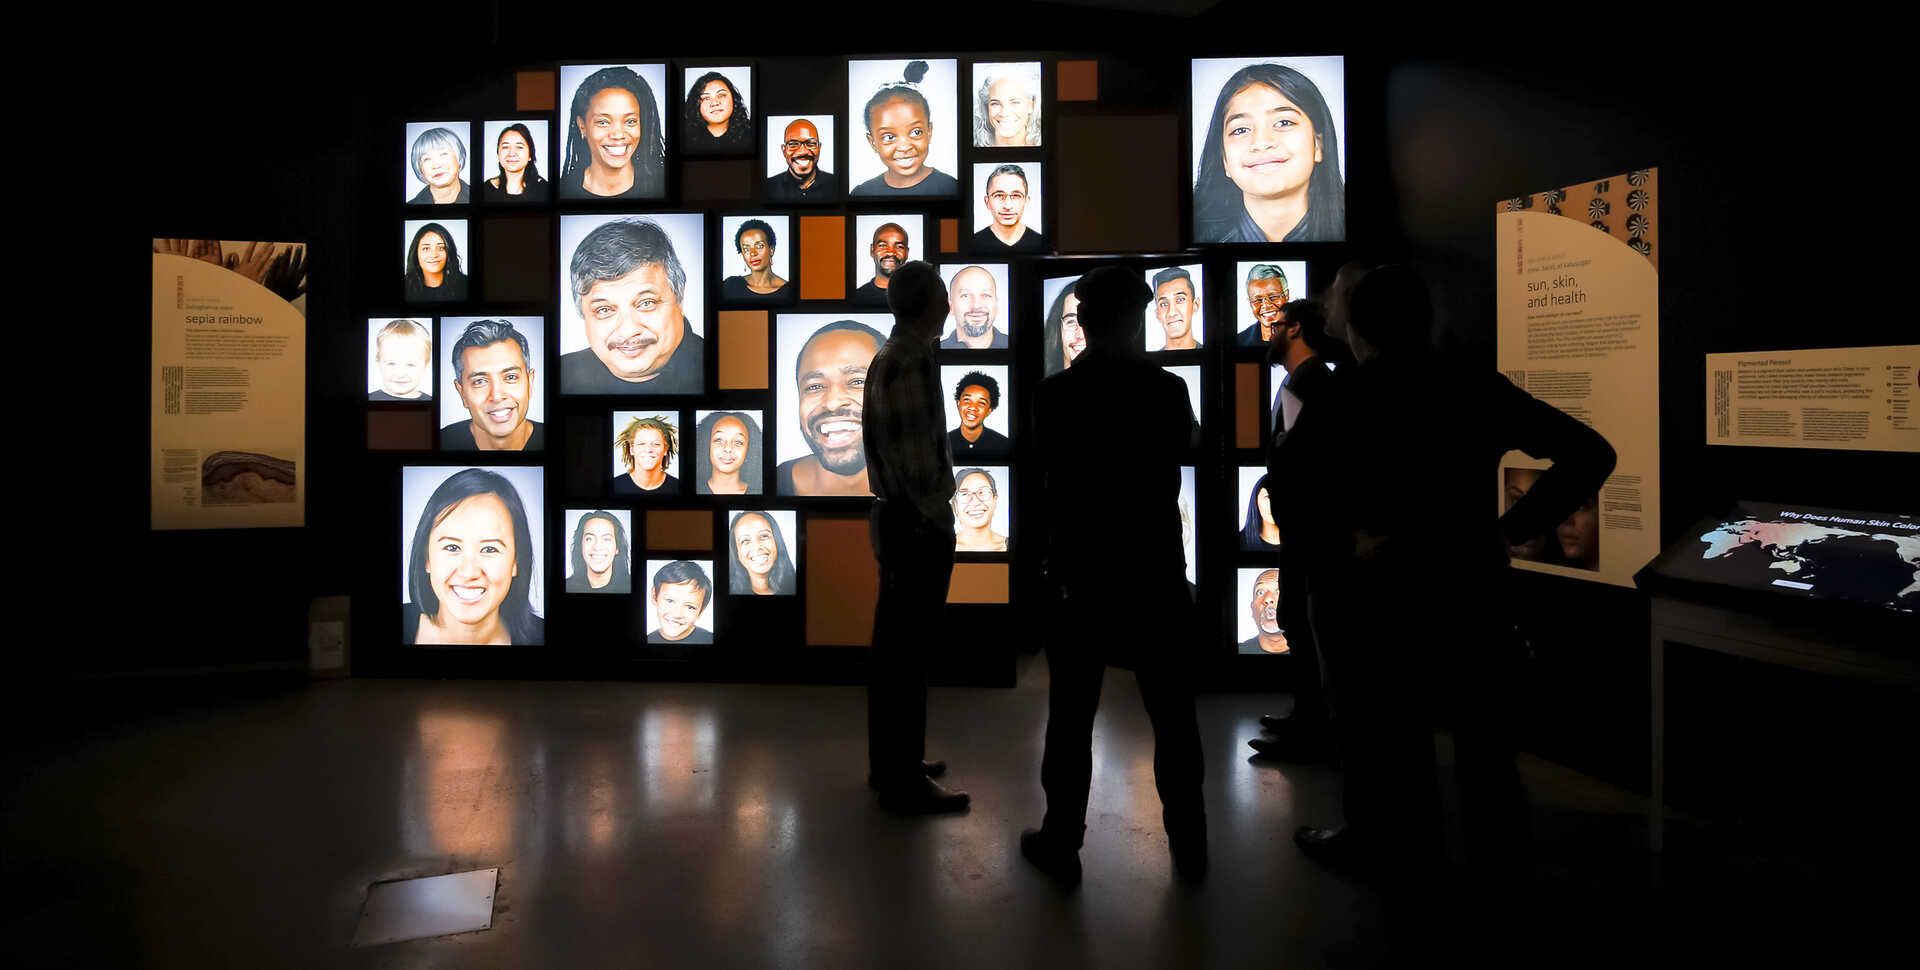 Video portrait wall from the Academy's Skin exhibit, with silhouetted guests in foreground